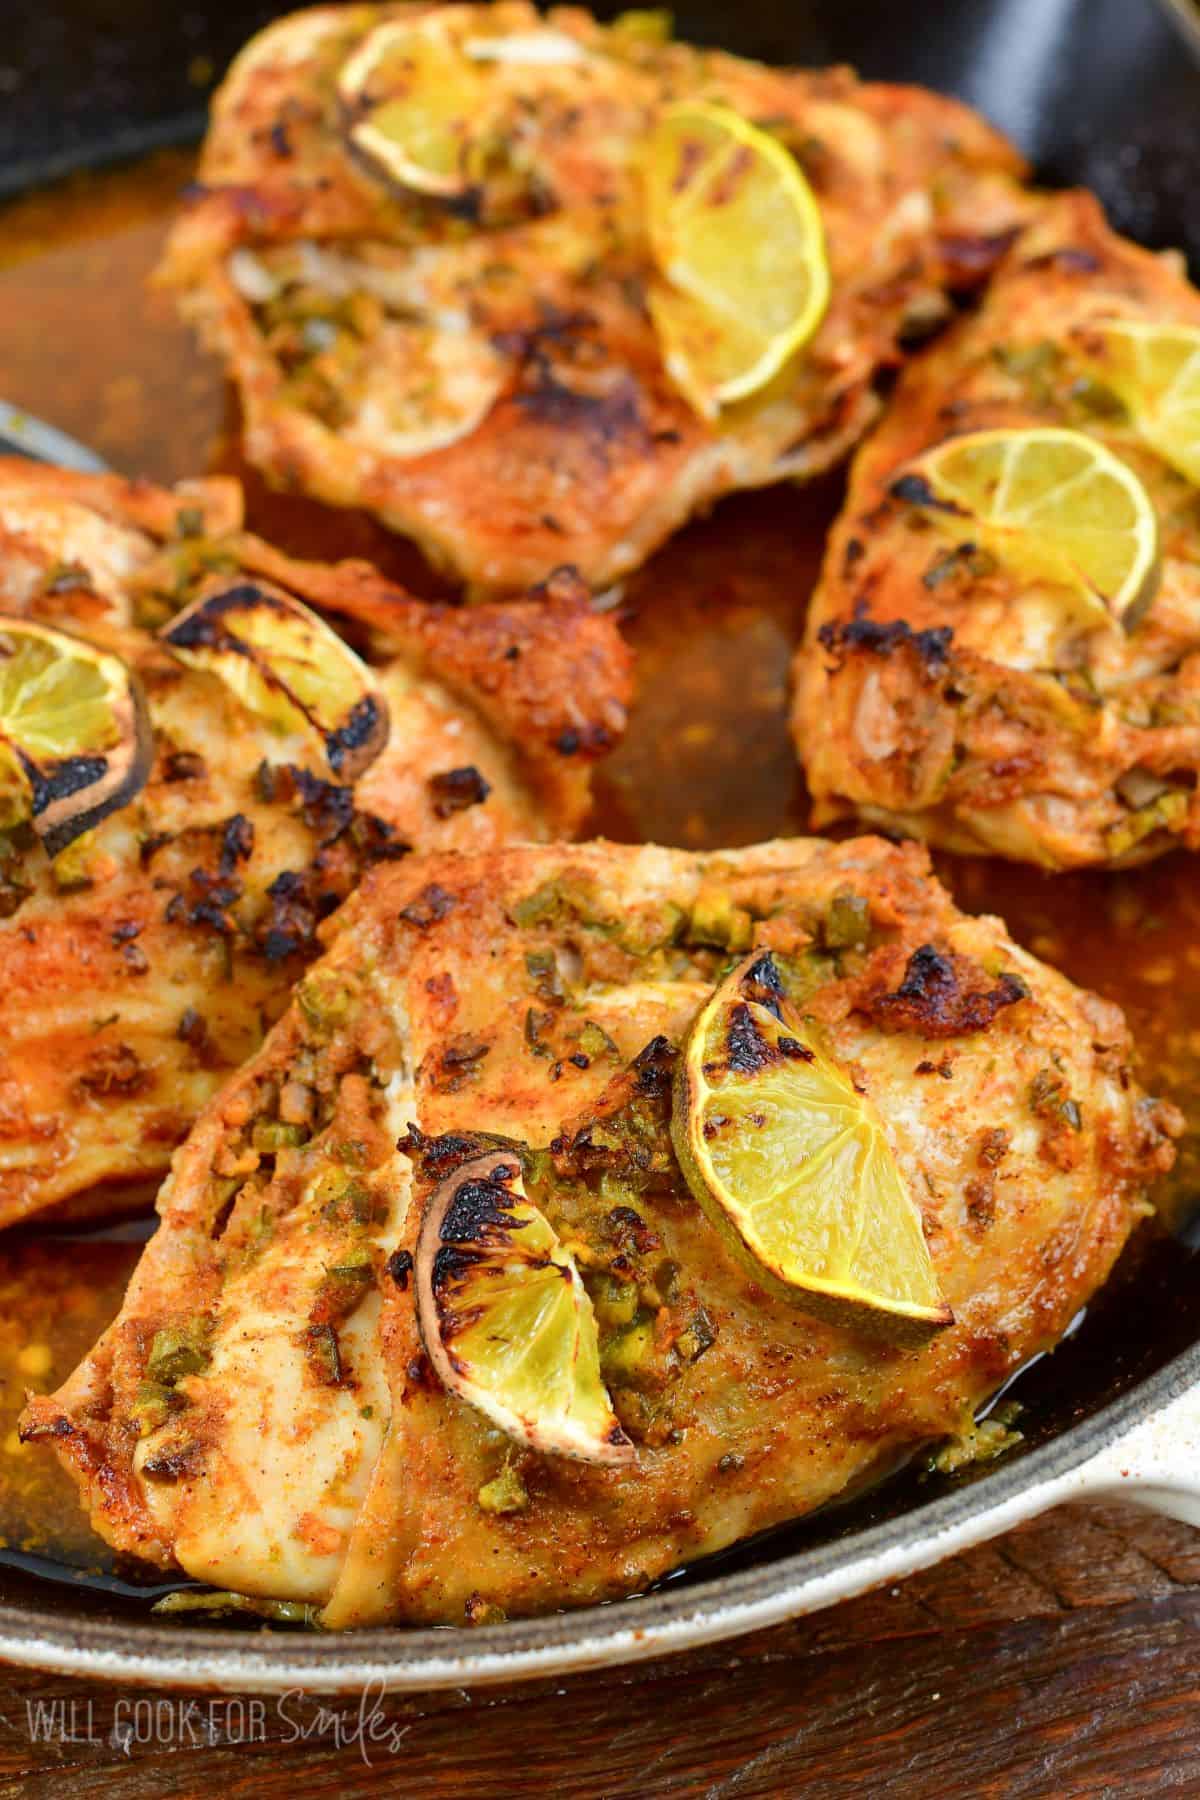 Four pieces of chicken in a pan with lemon slices on top.